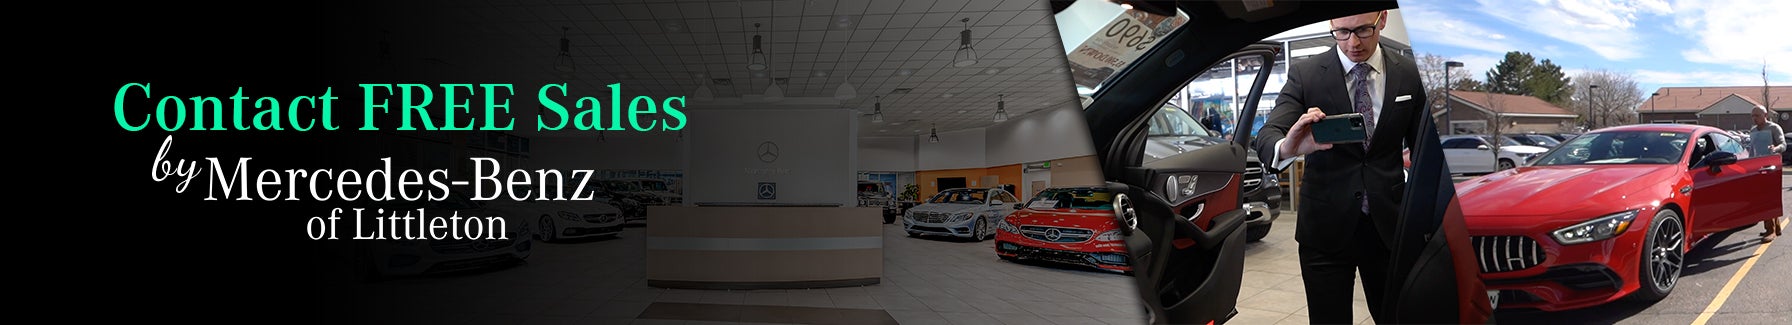 Mercedes-Benz of Littleton Contact Free Sales